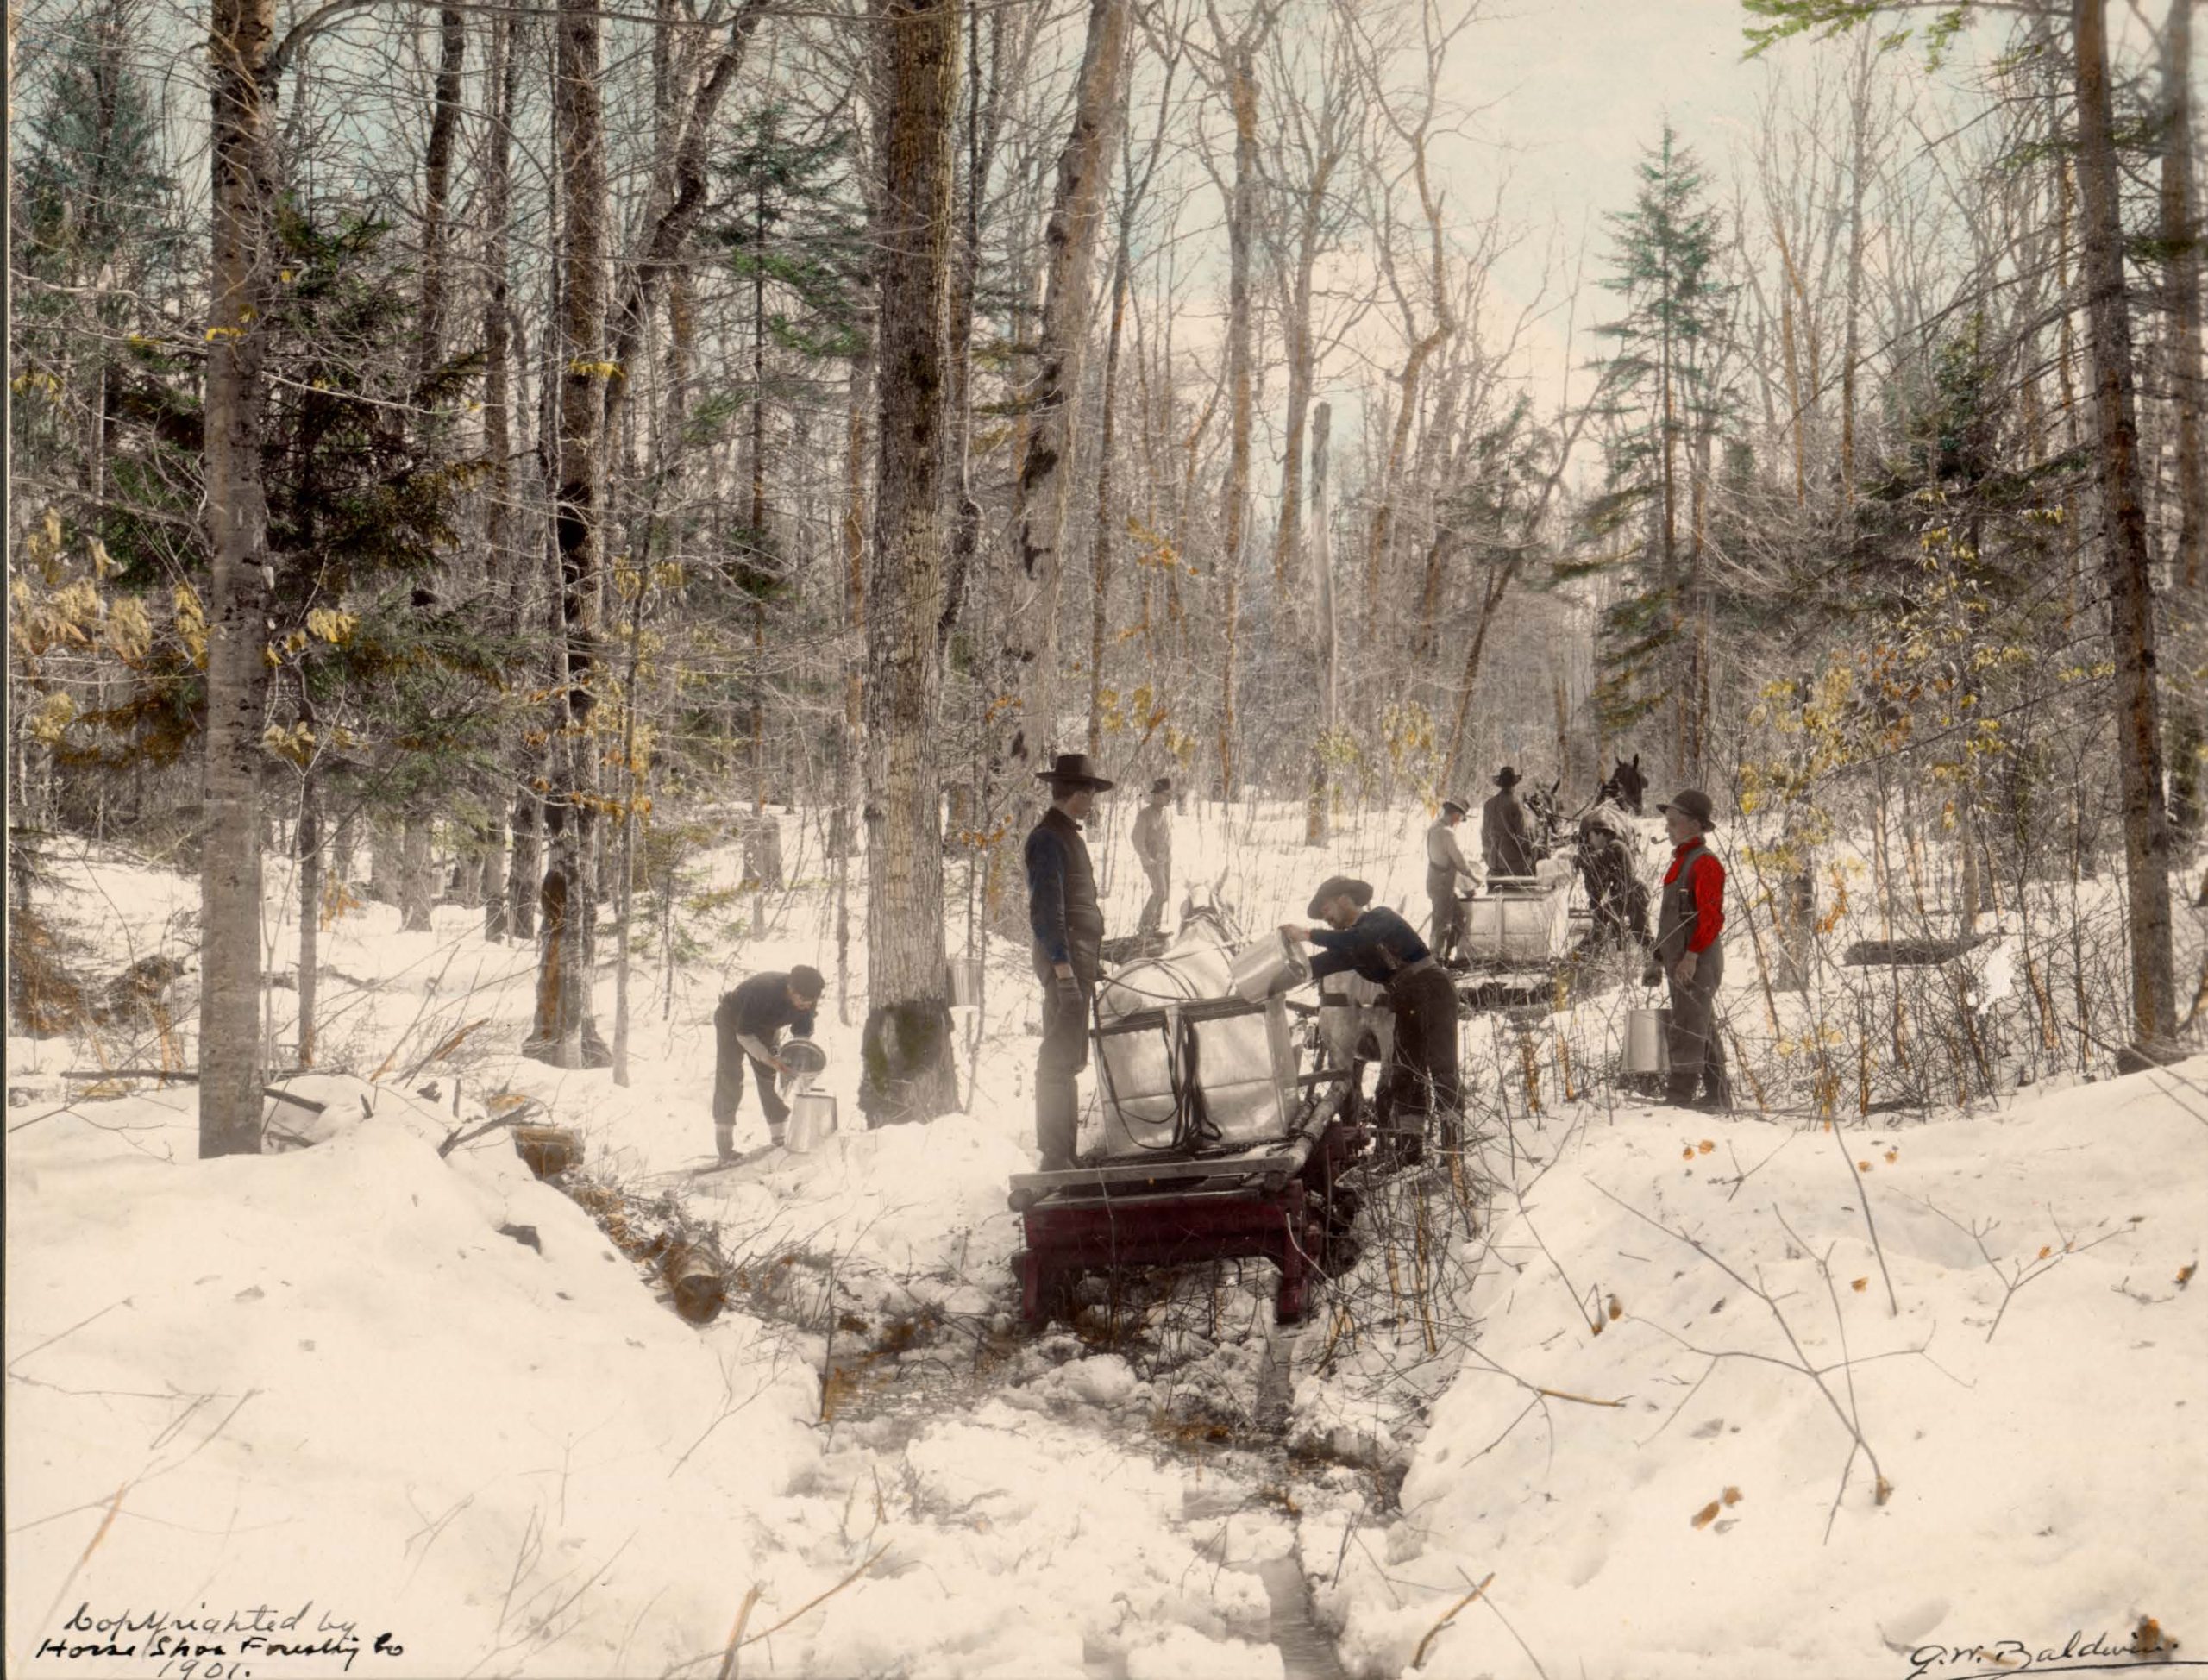 1901 Photograph of workers collecting sap from collection buckets into drums on horse-drawn sleighs